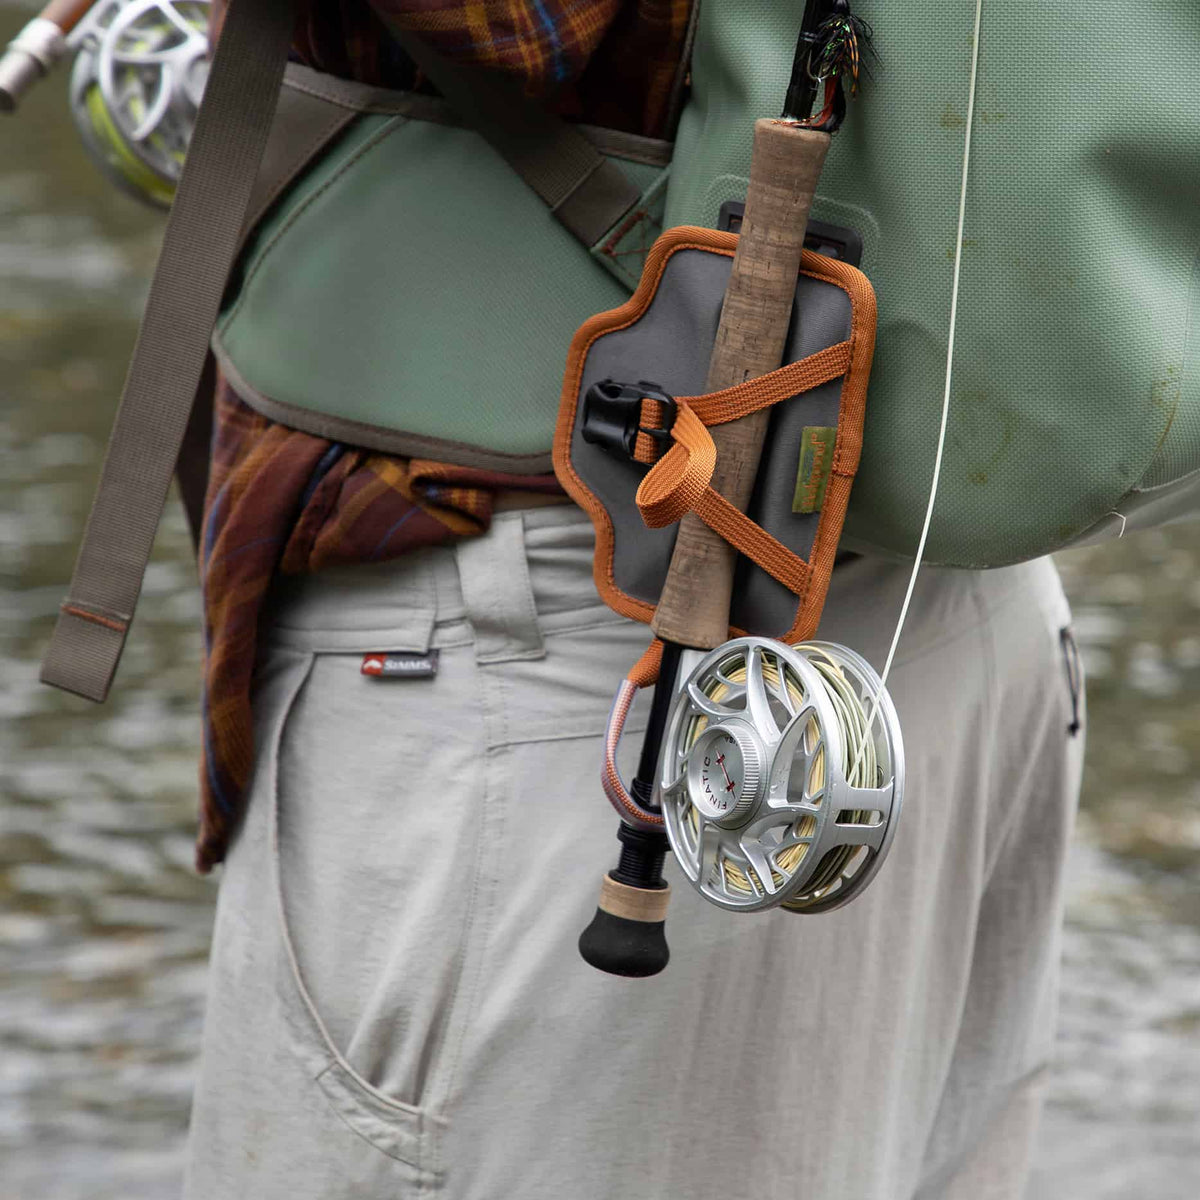 fishpond quikshot rod holder 2.0 attached to fishpond thunderhead pack